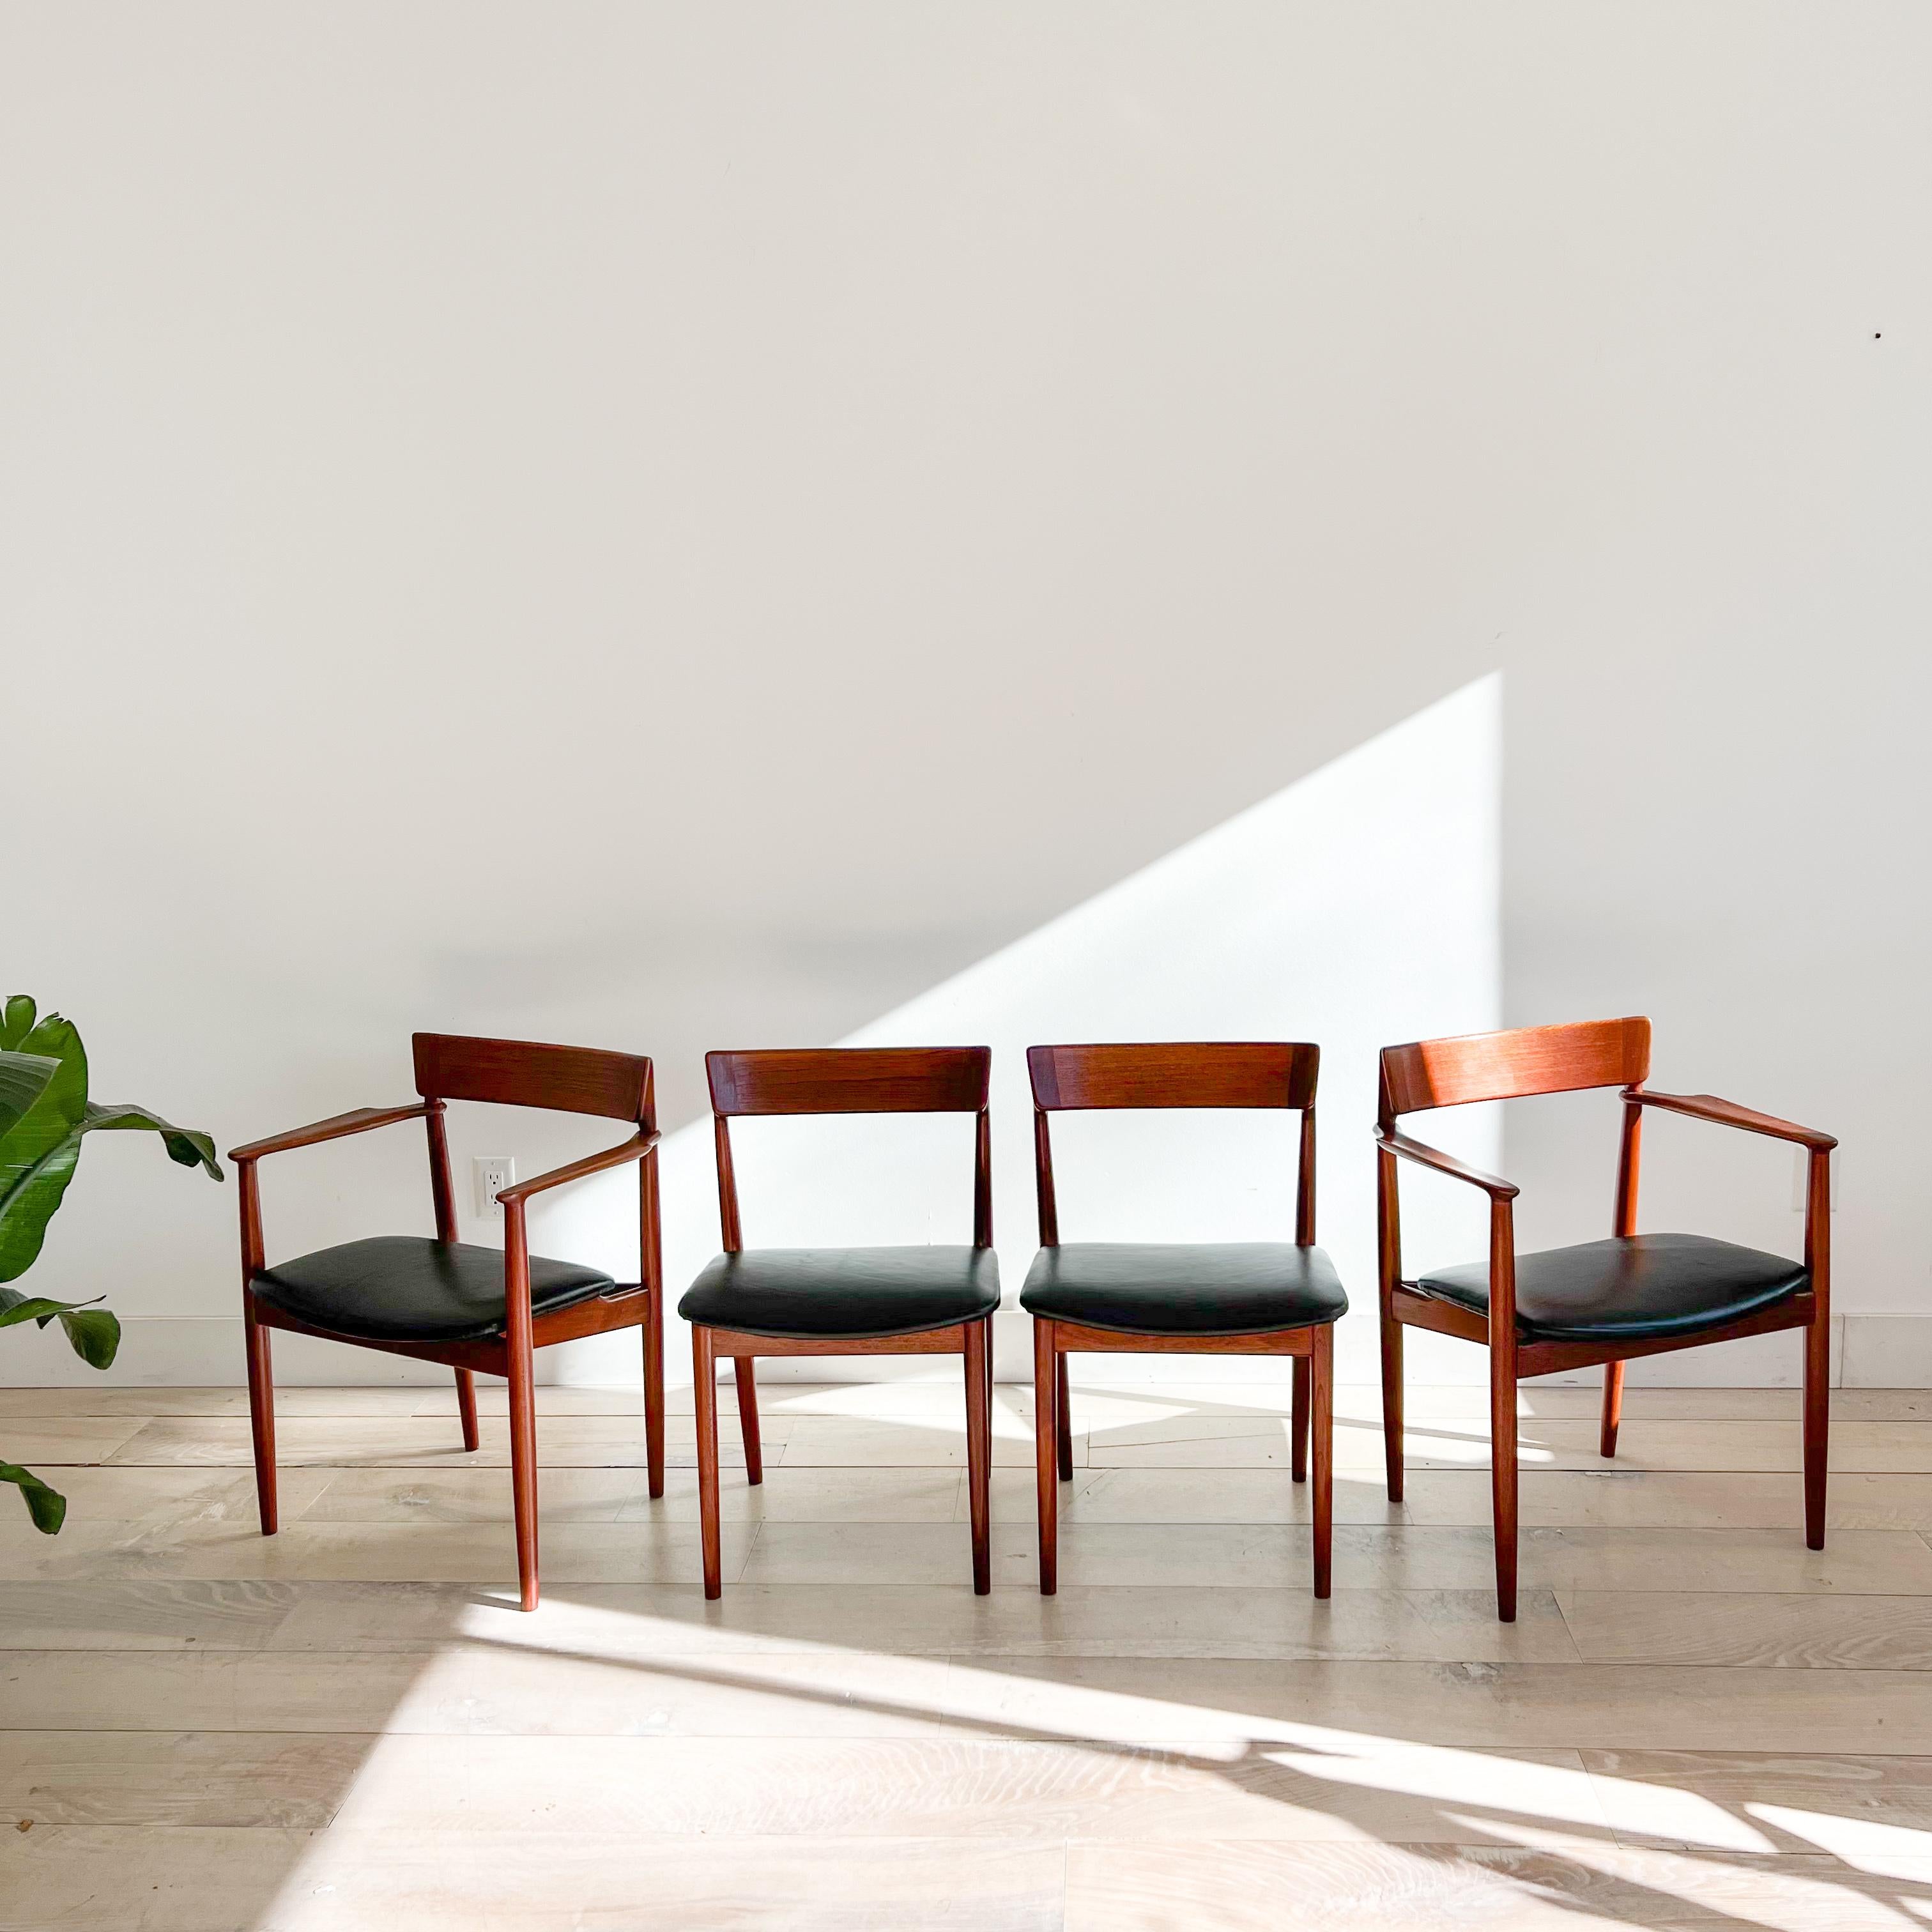 Introduce a touch of Danish design excellence to your dining space with this stylish set of 4 dining chairs crafted by Henry Rosengren Hansen for Brande. These mid-century modern chairs showcase a perfect fusion of form and function.

Recently